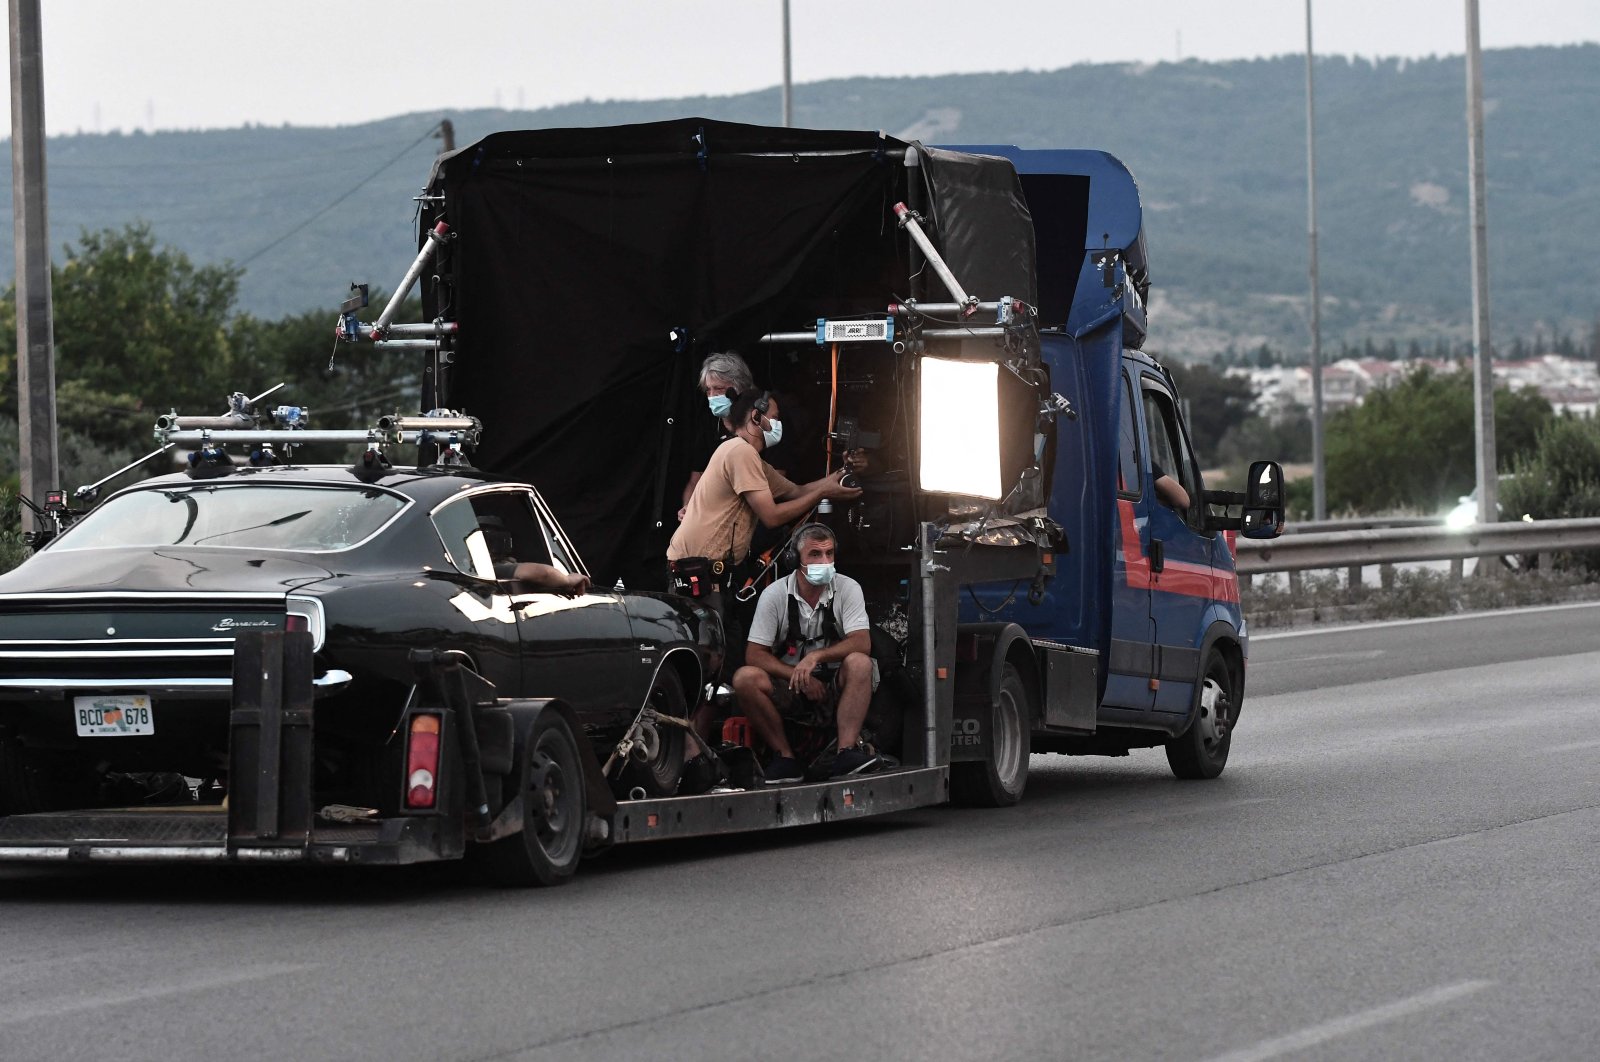 Film crew members work during the filming of the action thriller, "The Enforcer," starring Spanish actor, film director and producer Antonio Banderas, in the ring road of Thessaloniki, Greece, June 30, 2021. (AFP Photo)